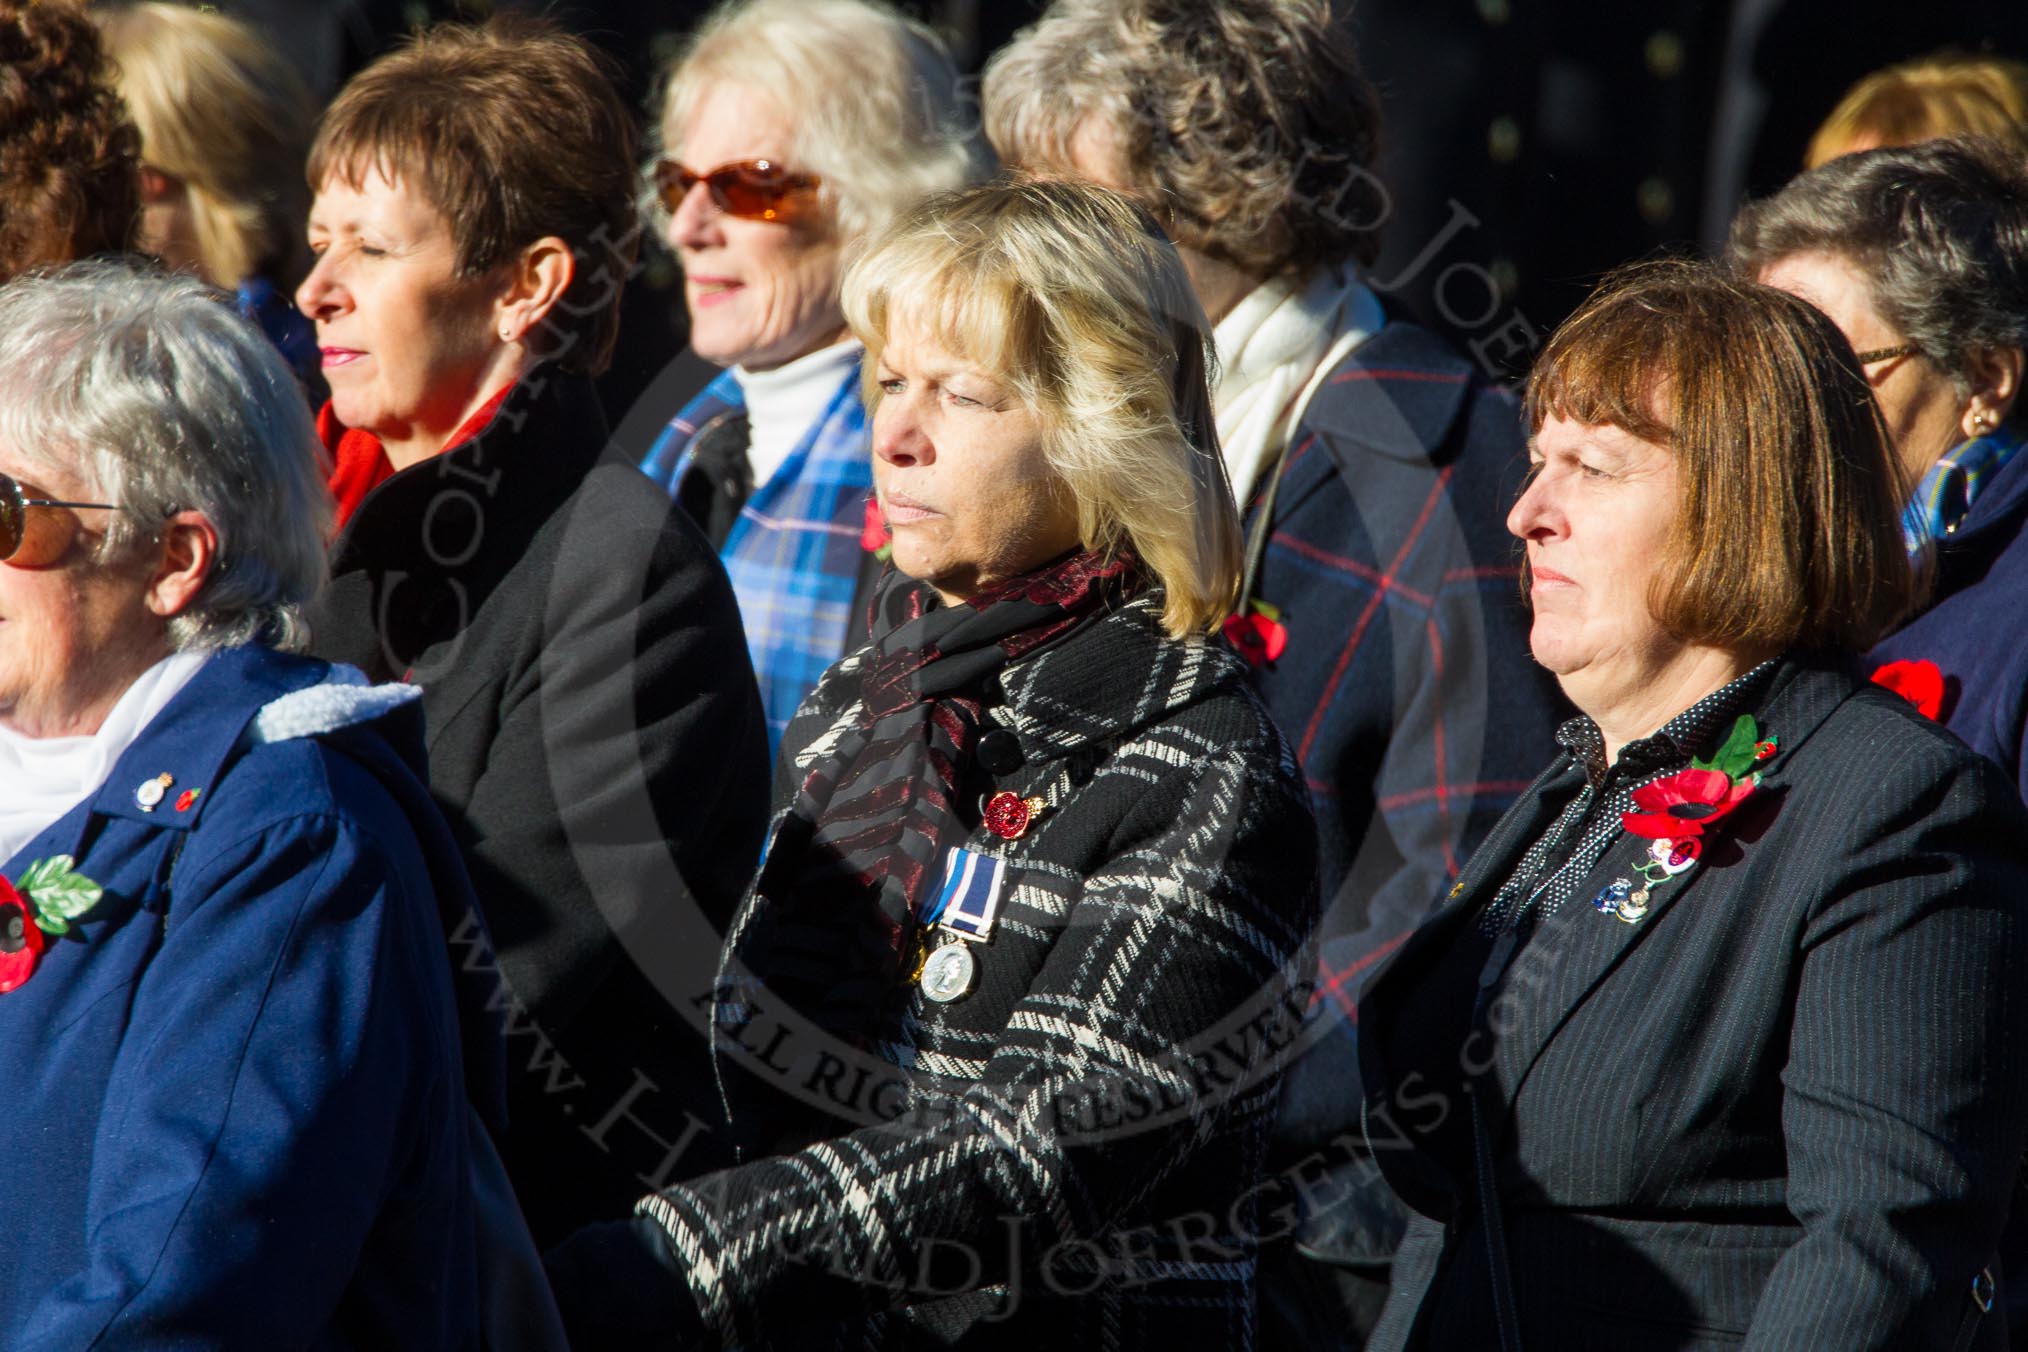 Remembrance Sunday Cenotaph March Past 2013: E30 - Association of WRENS..
Press stand opposite the Foreign Office building, Whitehall, London SW1,
London,
Greater London,
United Kingdom,
on 10 November 2013 at 11:47, image #600